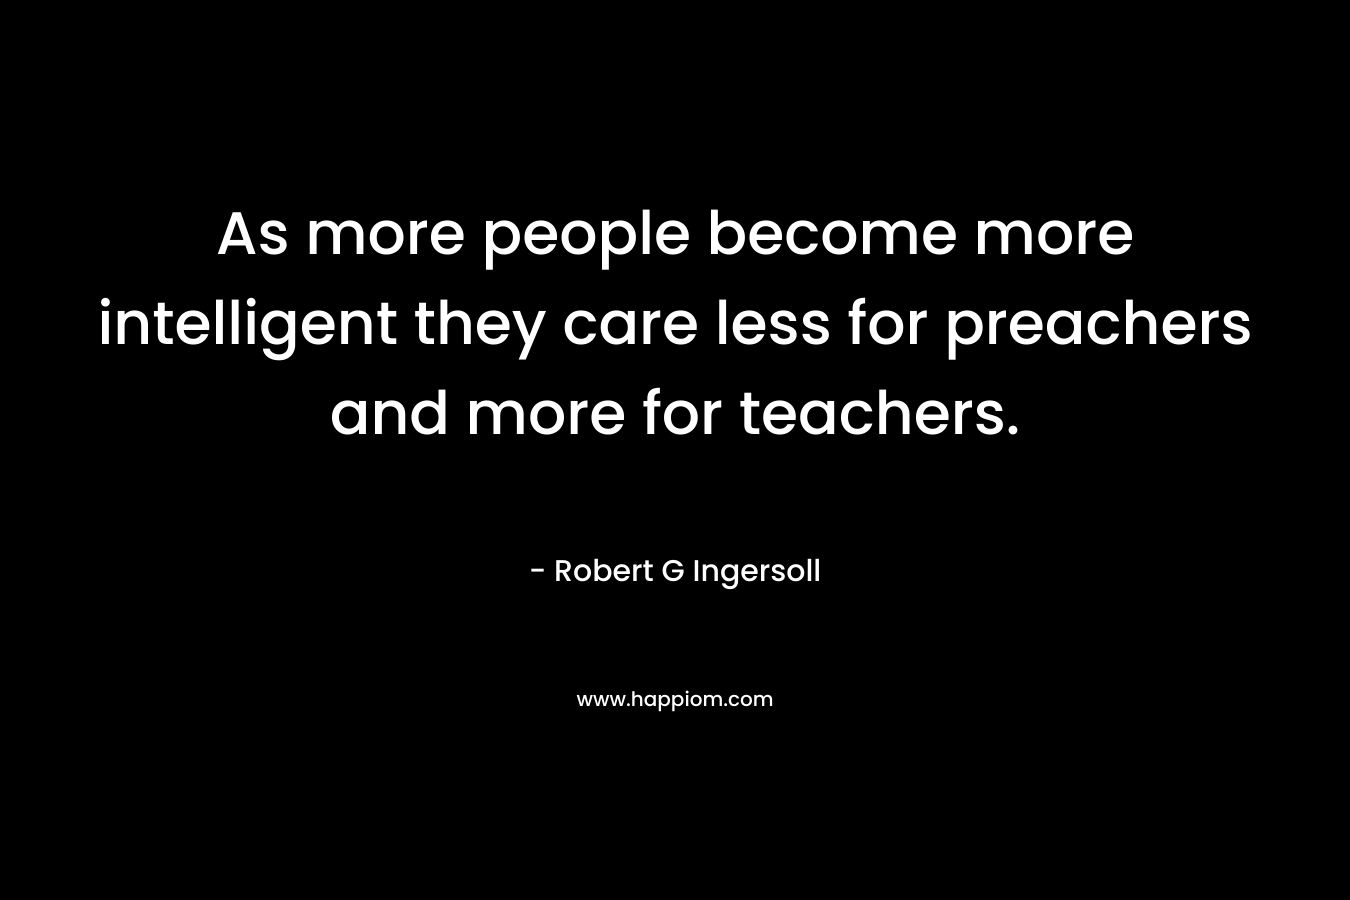 As more people become more intelligent they care less for preachers and more for teachers.